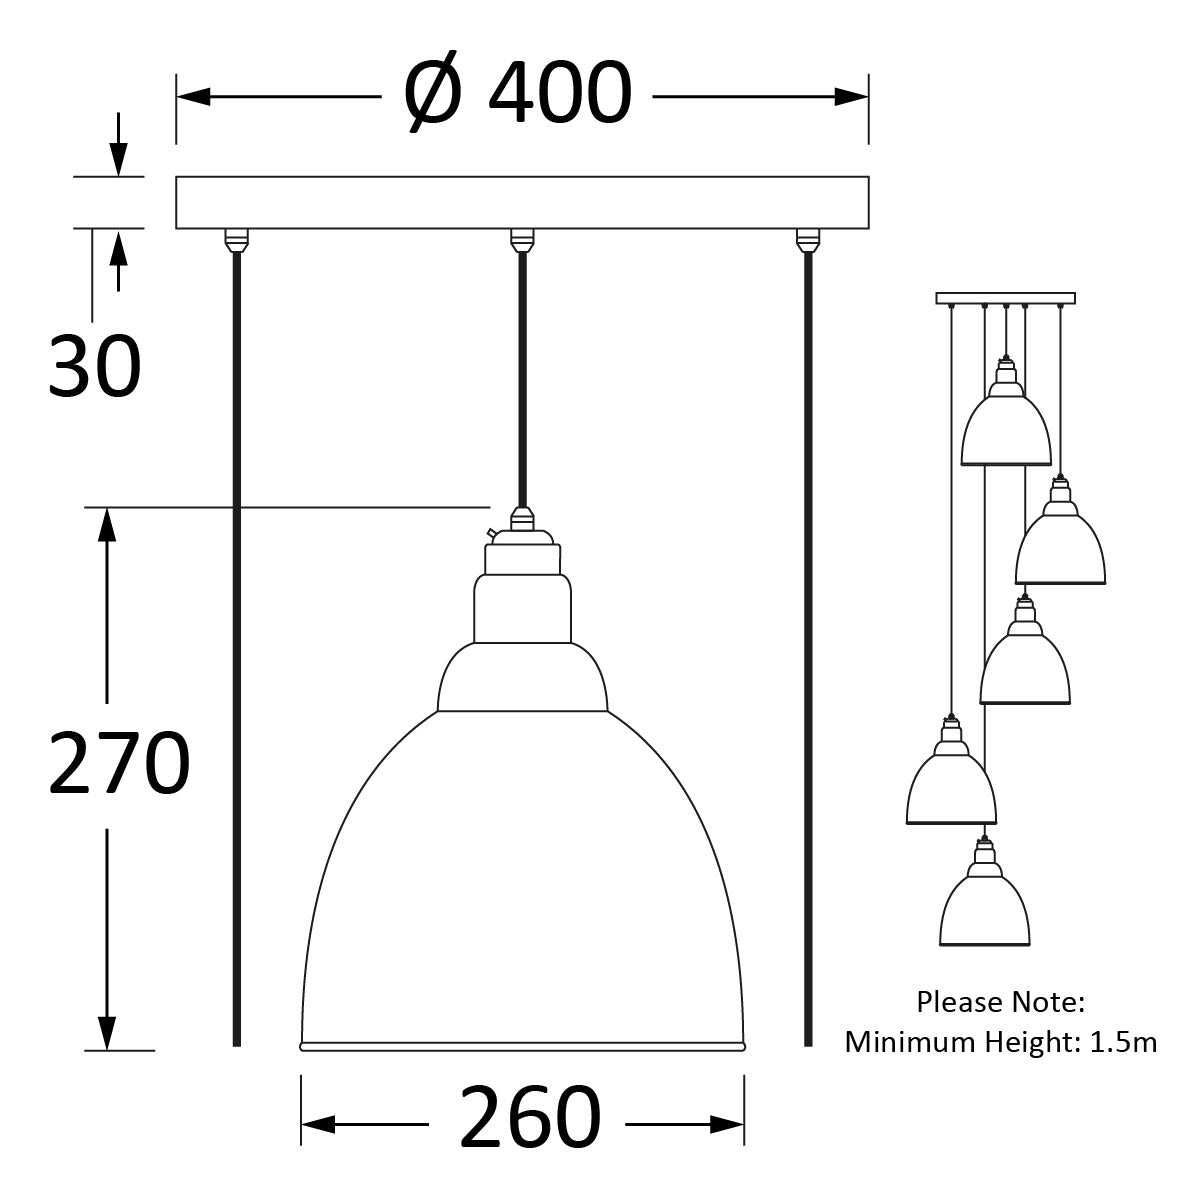 SHOW Technical Drawing of Brindley Cluster Light in Soot